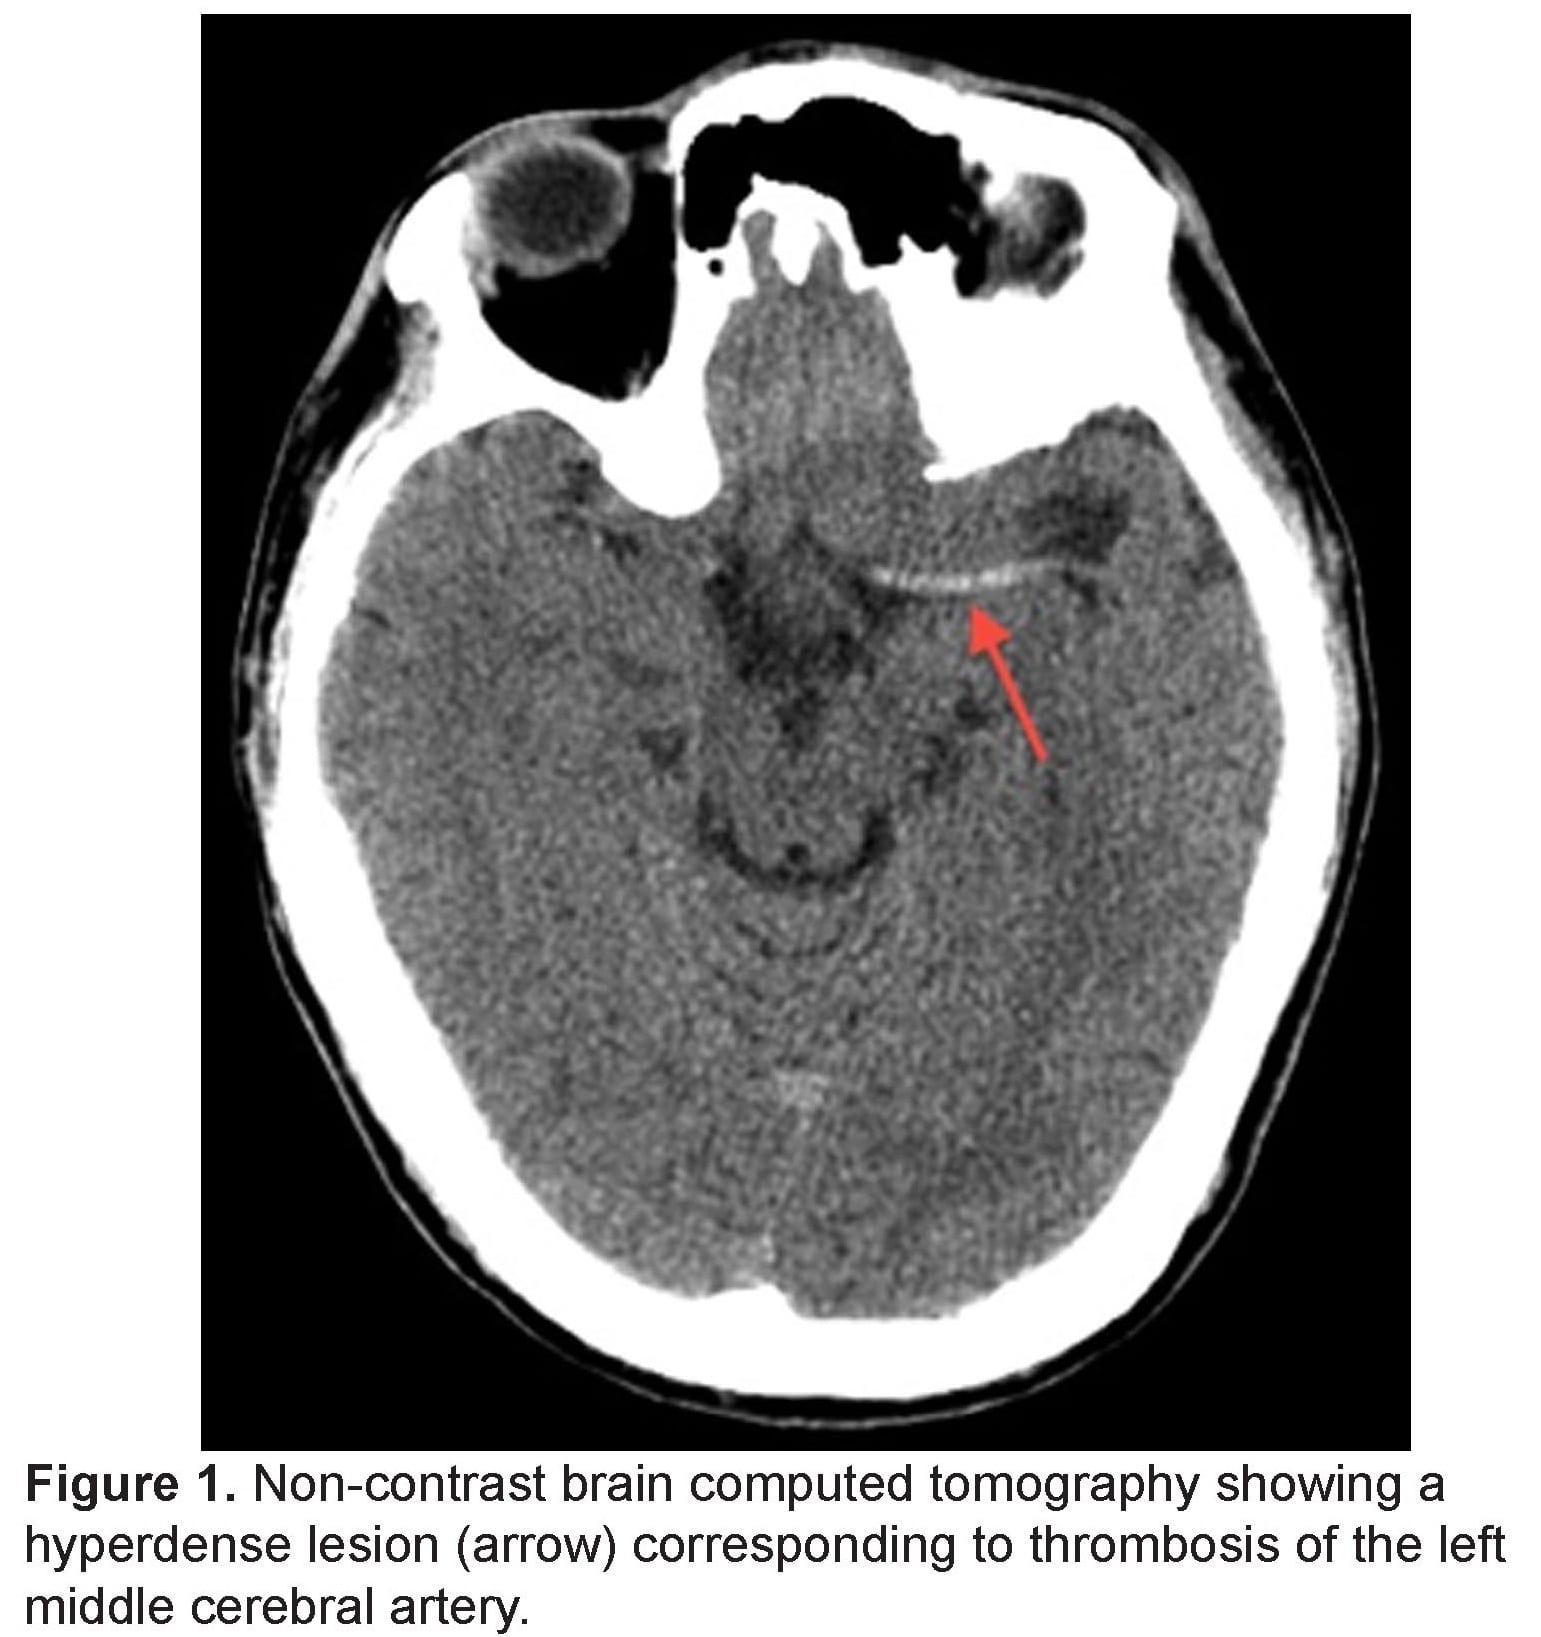 Takayasu’s Arteritis – An Unusual Cause of Stroke in a Young Patient